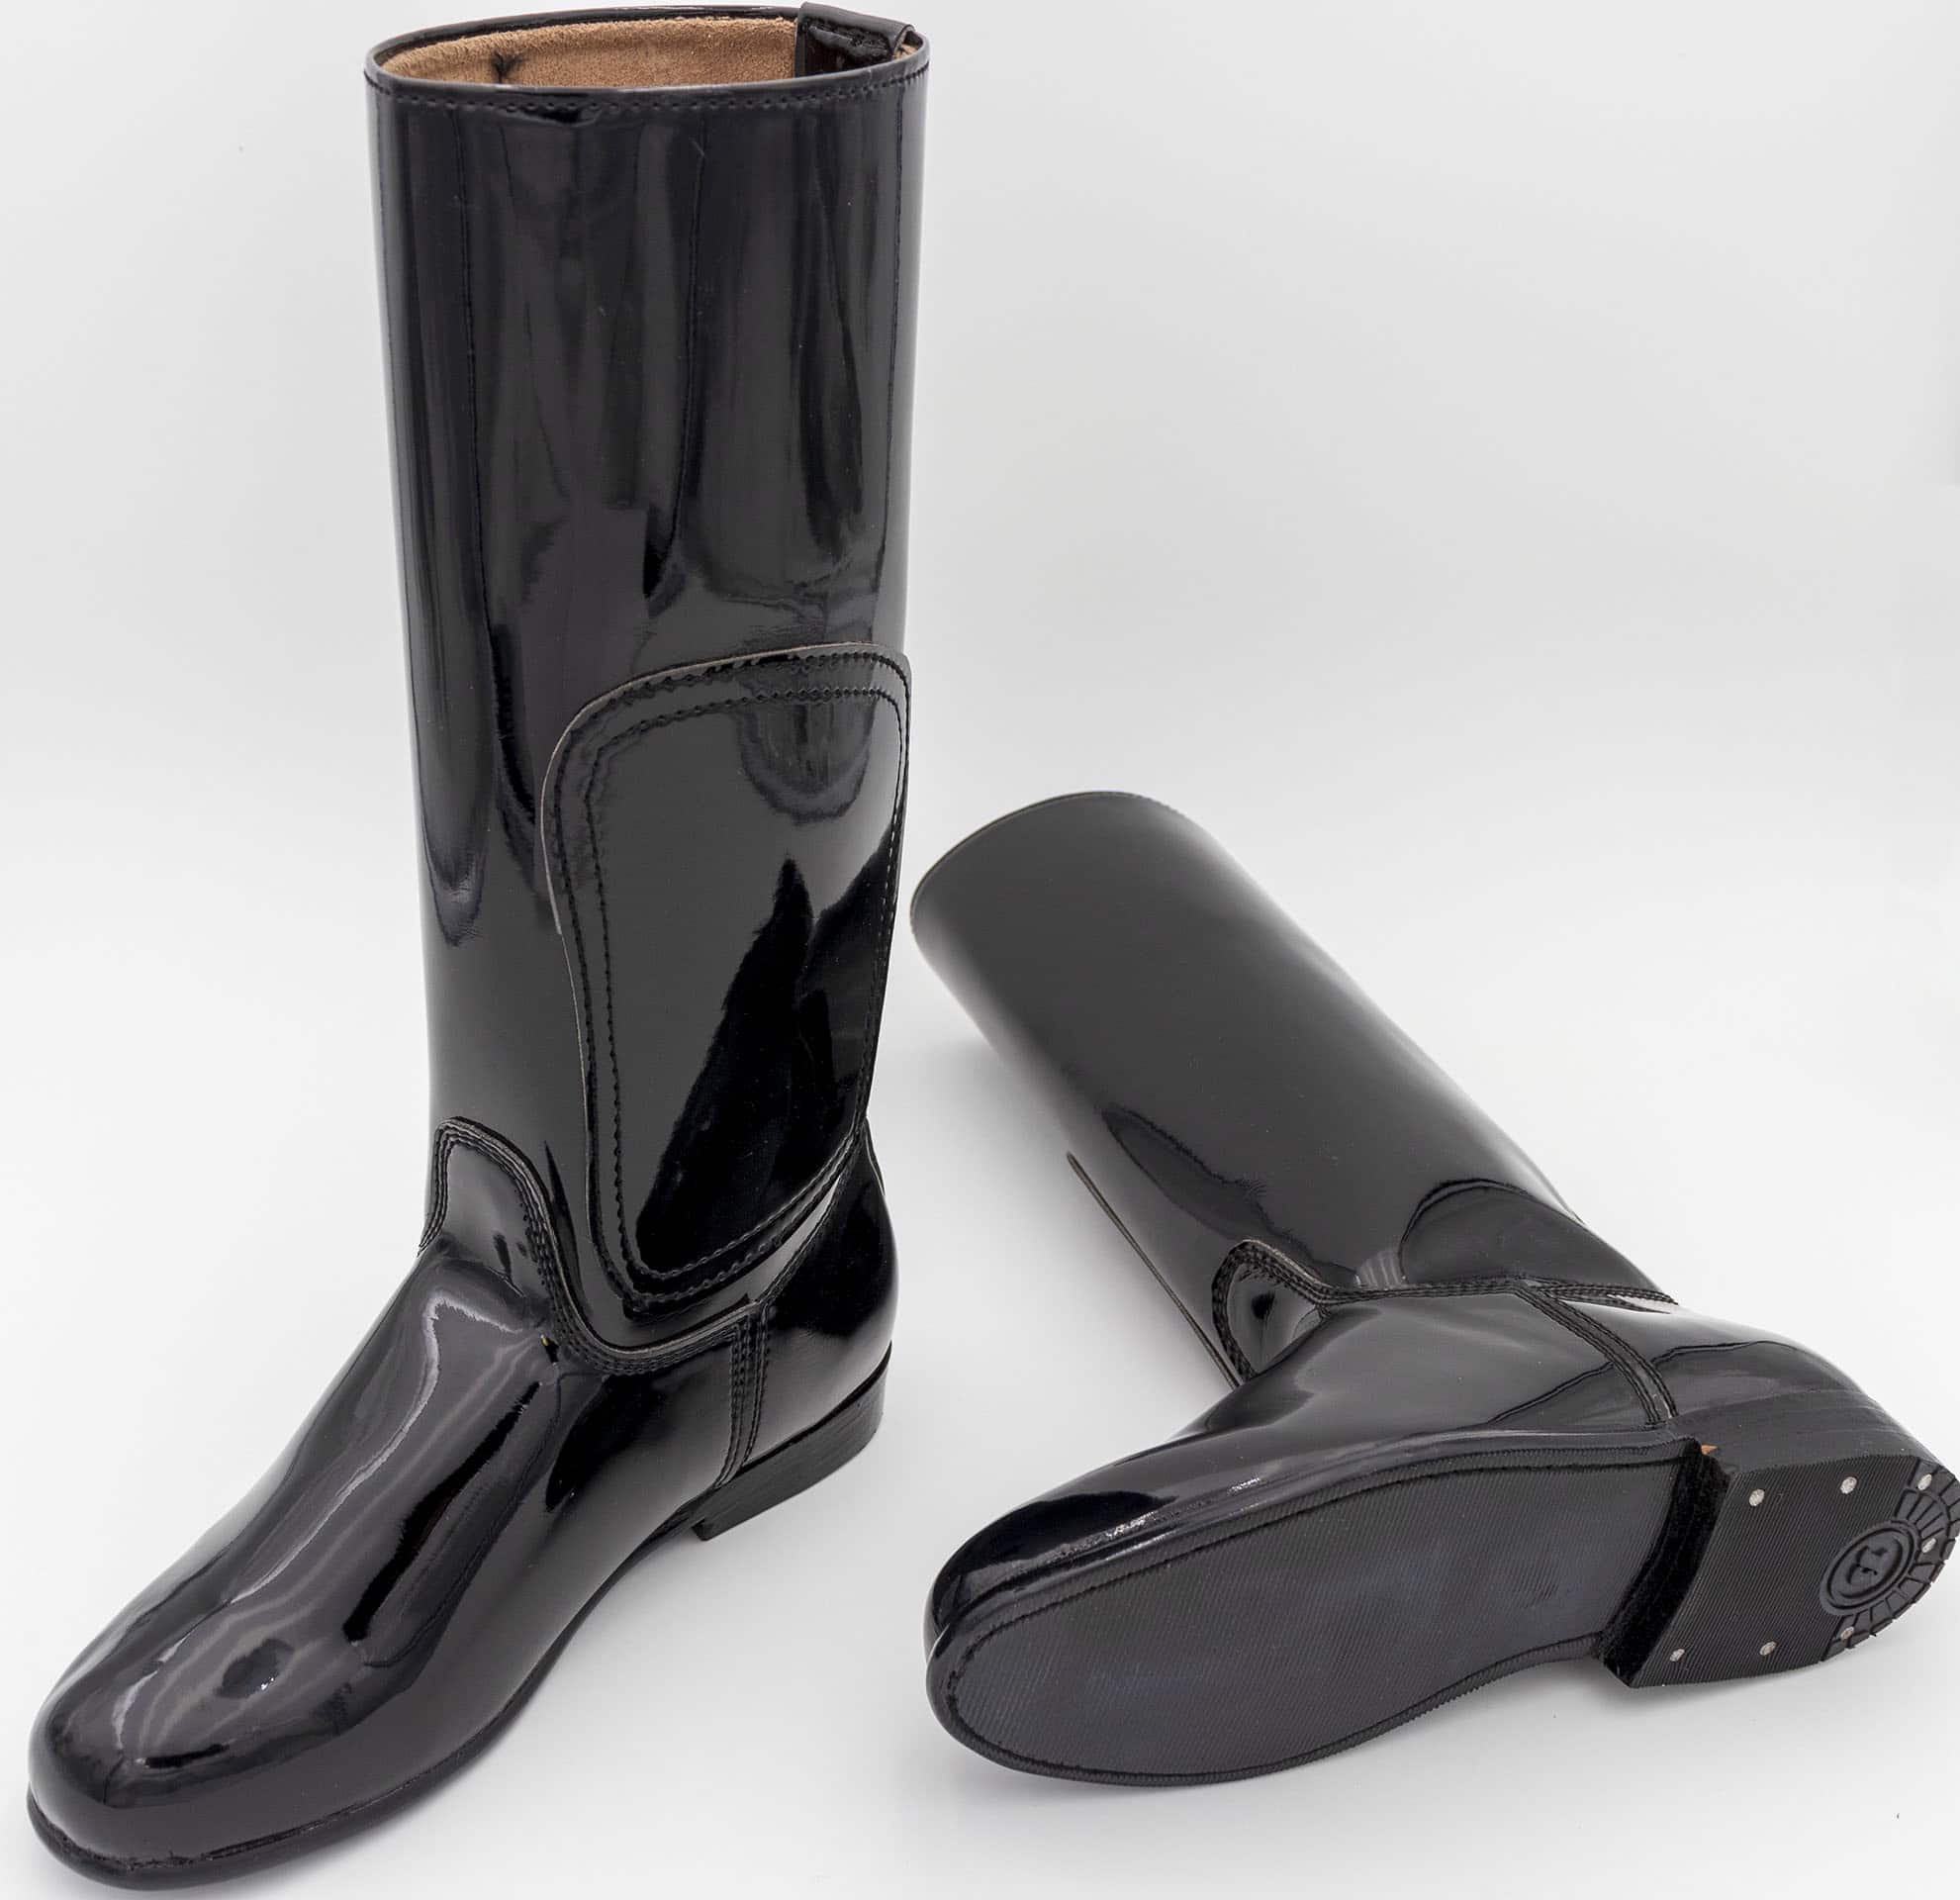 Thoroughbred Riding Boots | Equiwin 